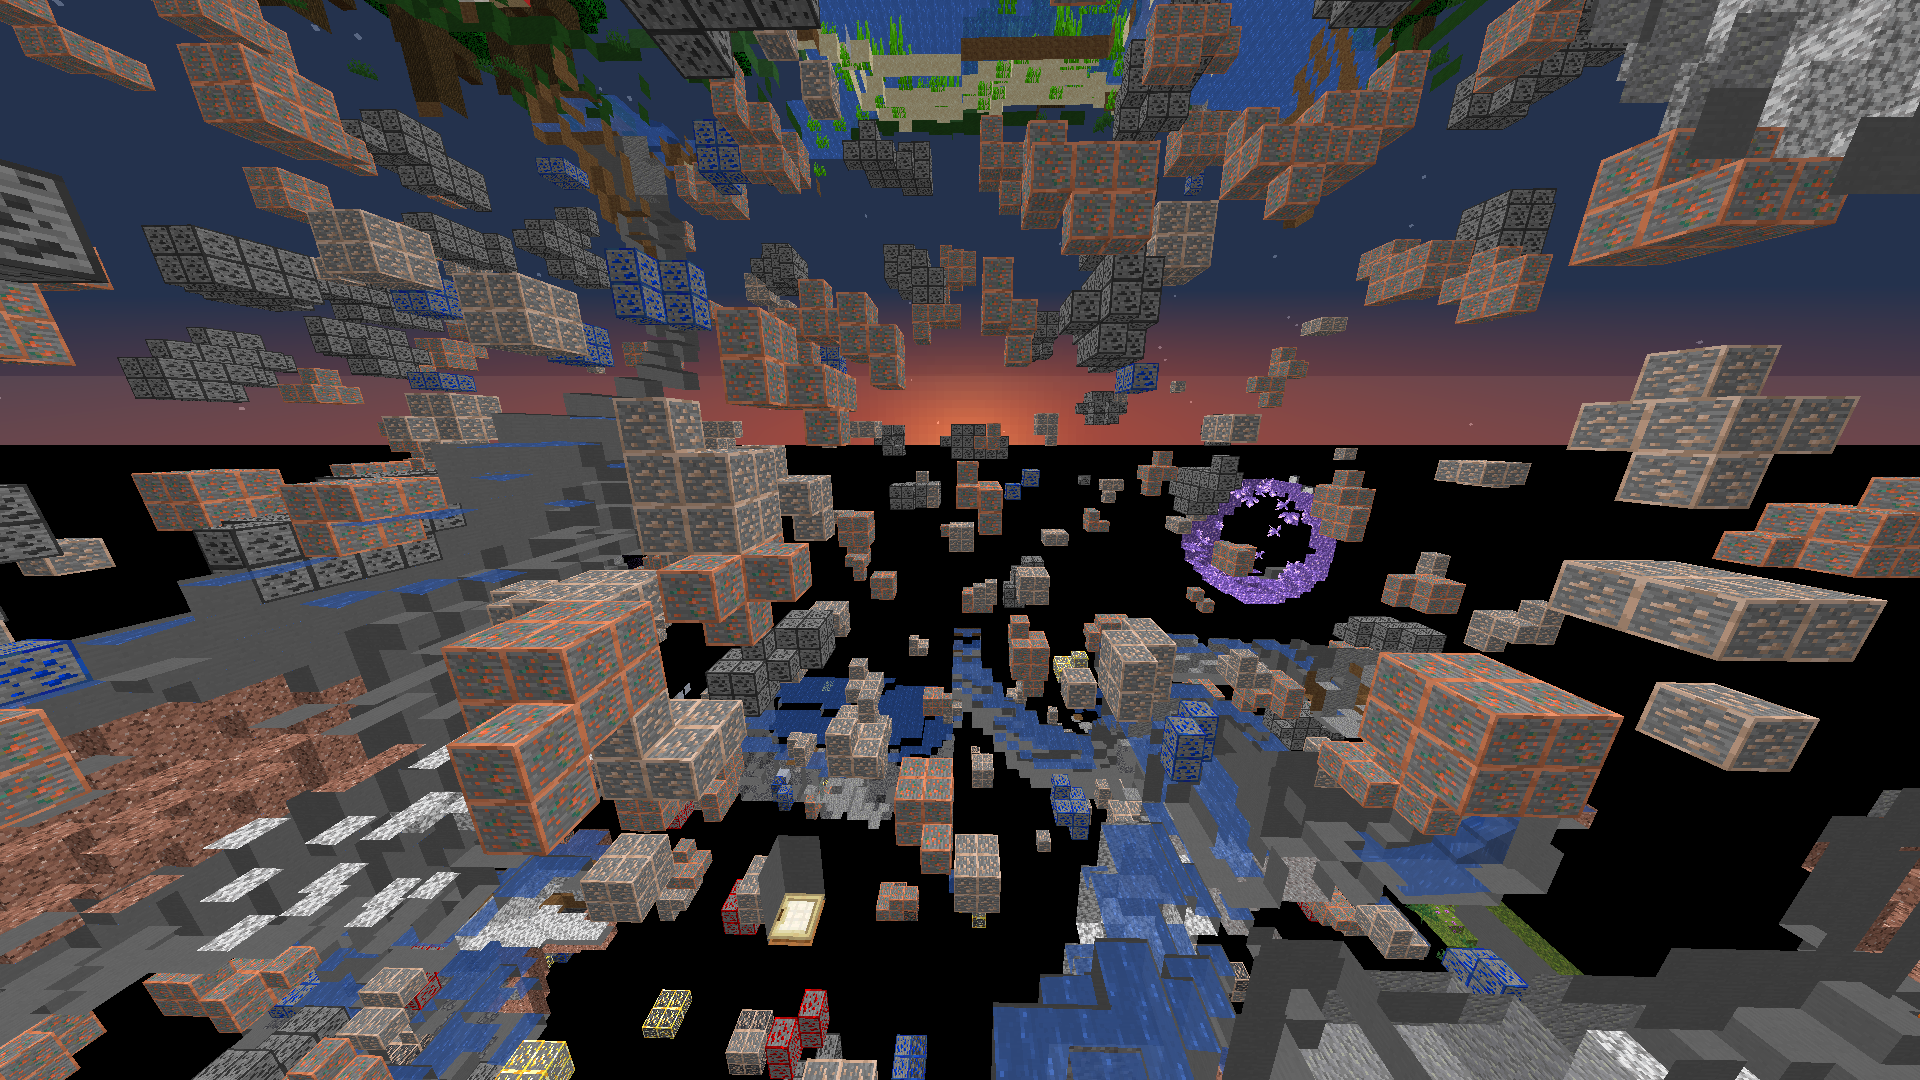 This is what spectator mode looks like with the texture pack on.